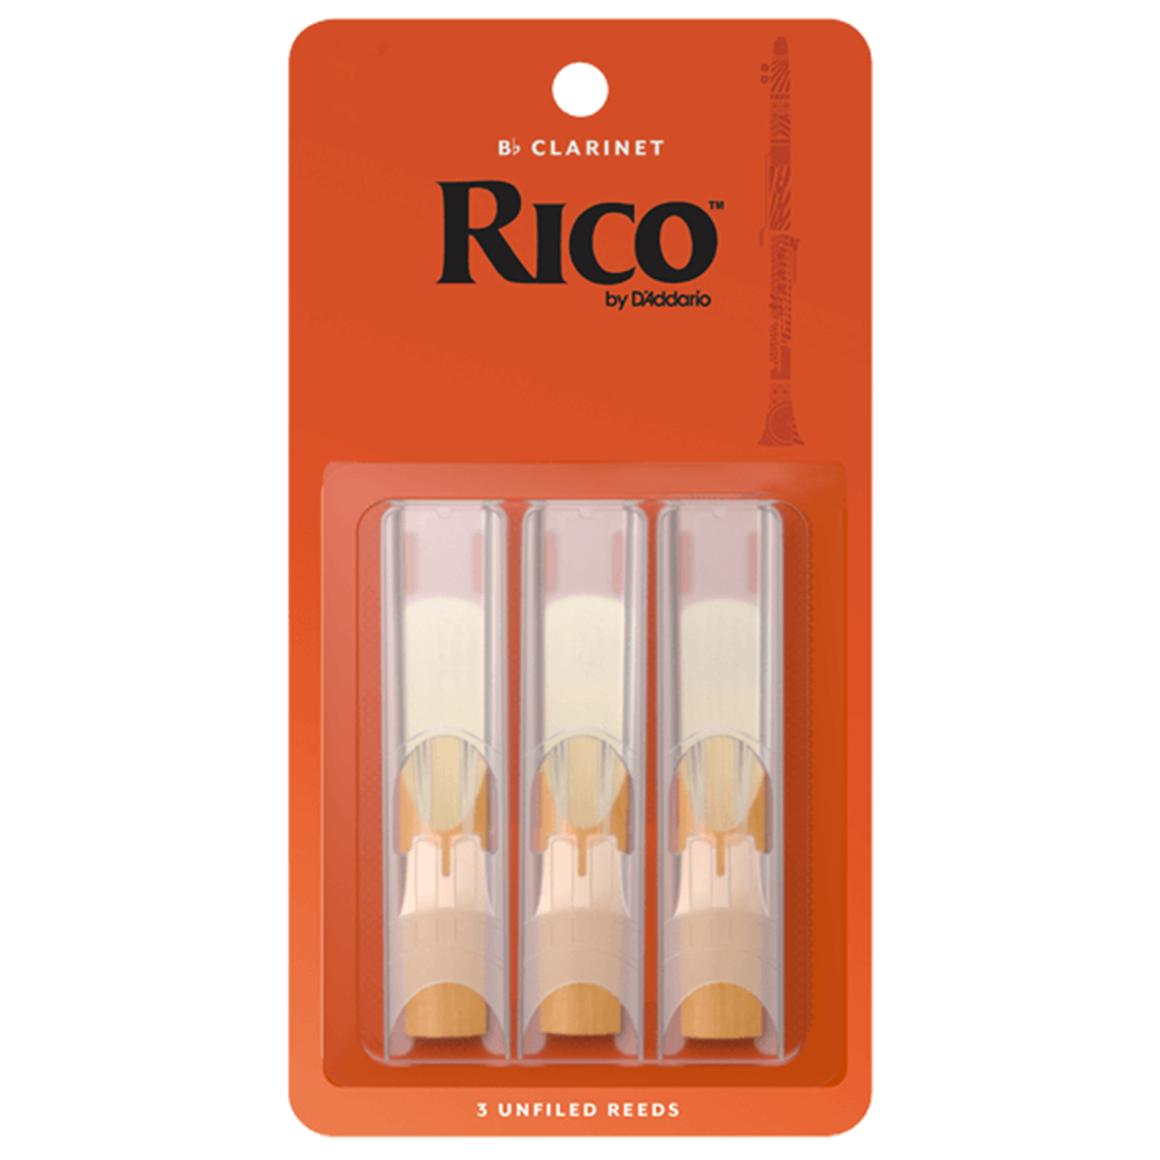 RICO RCA0325 #2.5 Clarinet Reeds, 3 Pack